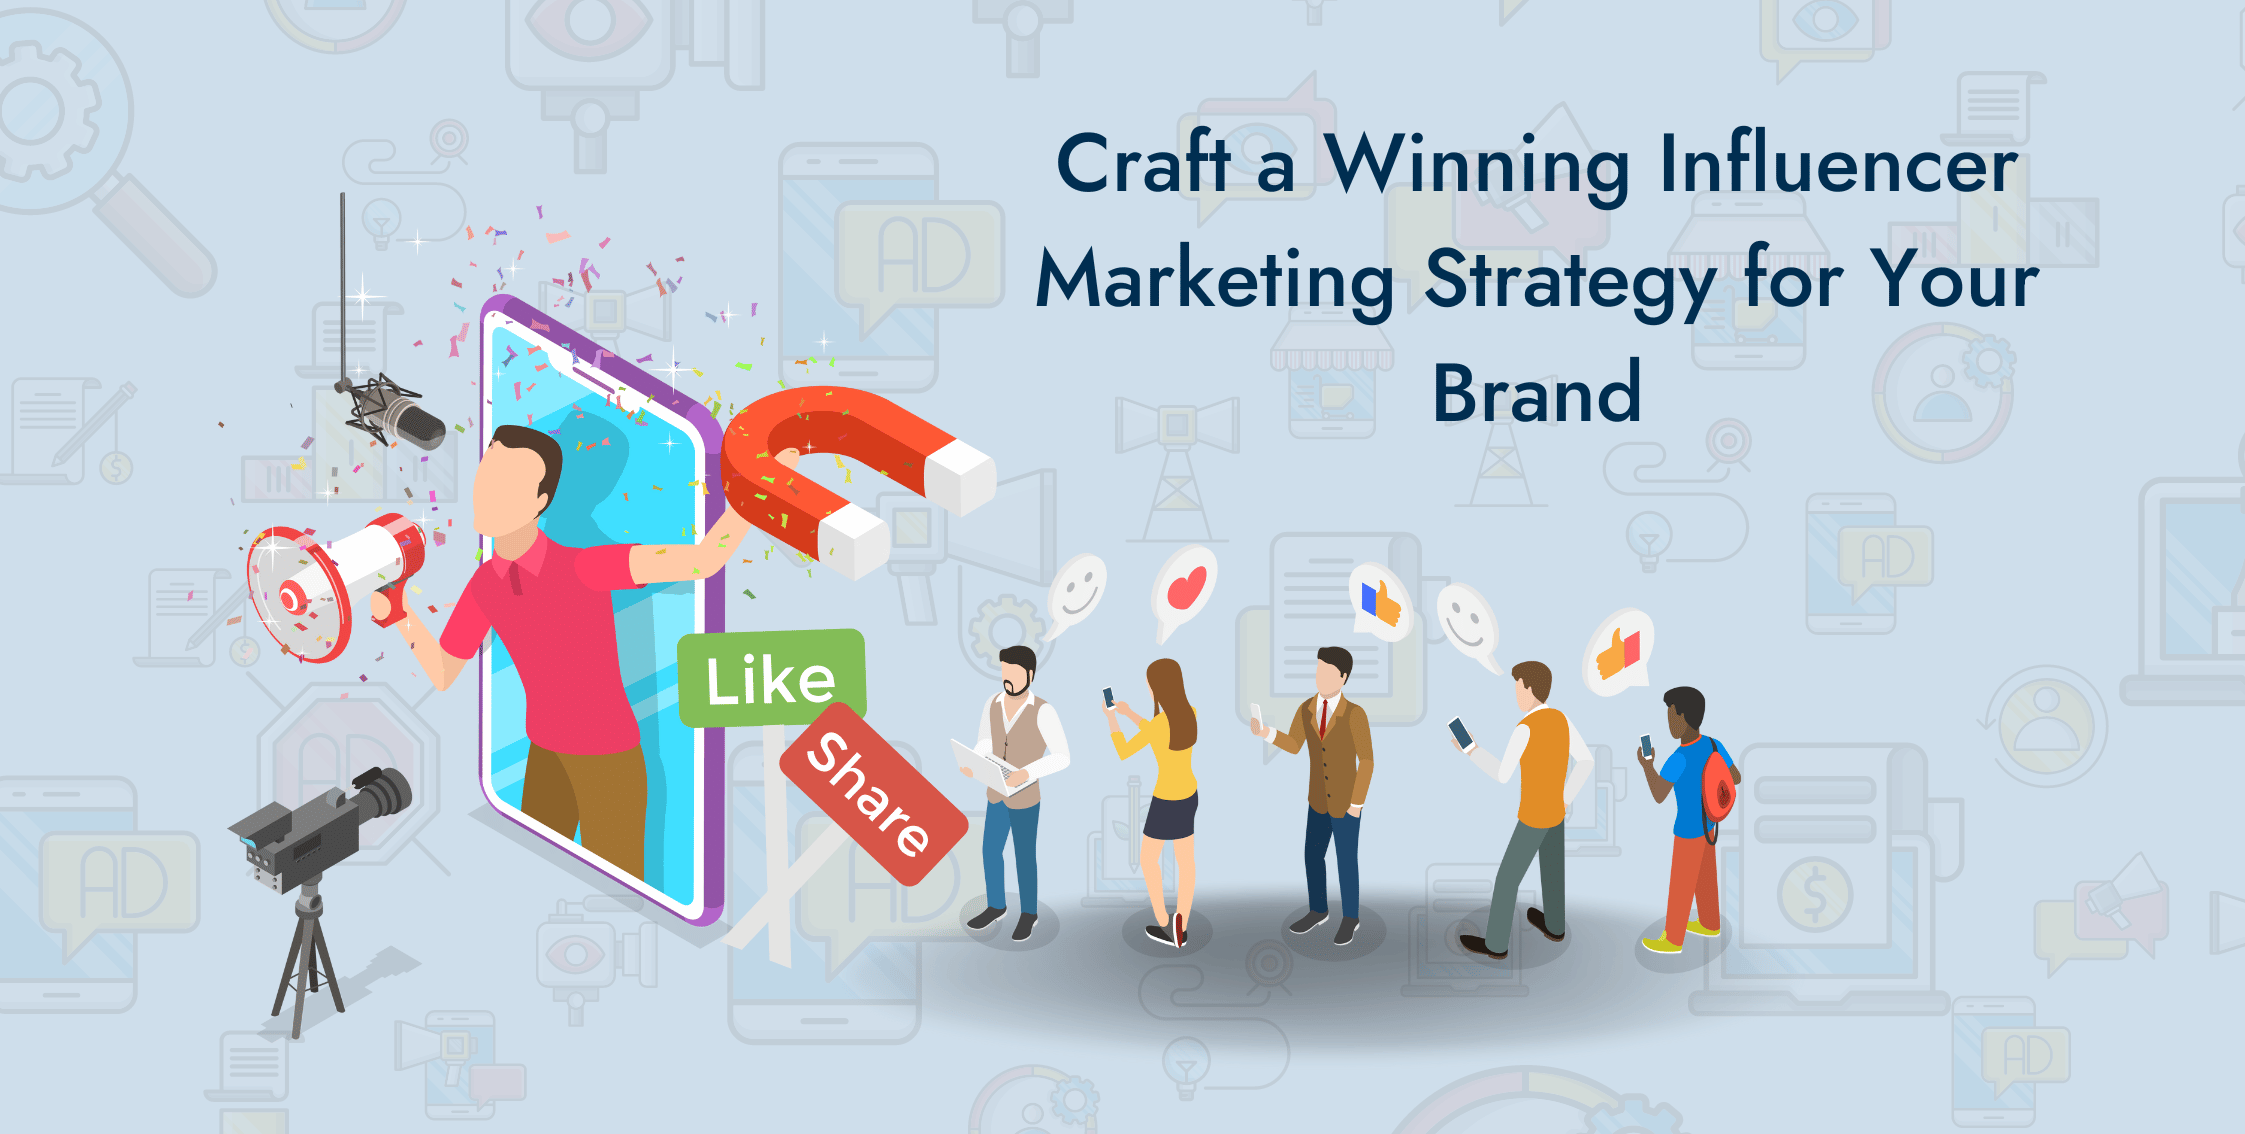 Craft a Winning Influencer Marketing Strategy for Your Brand